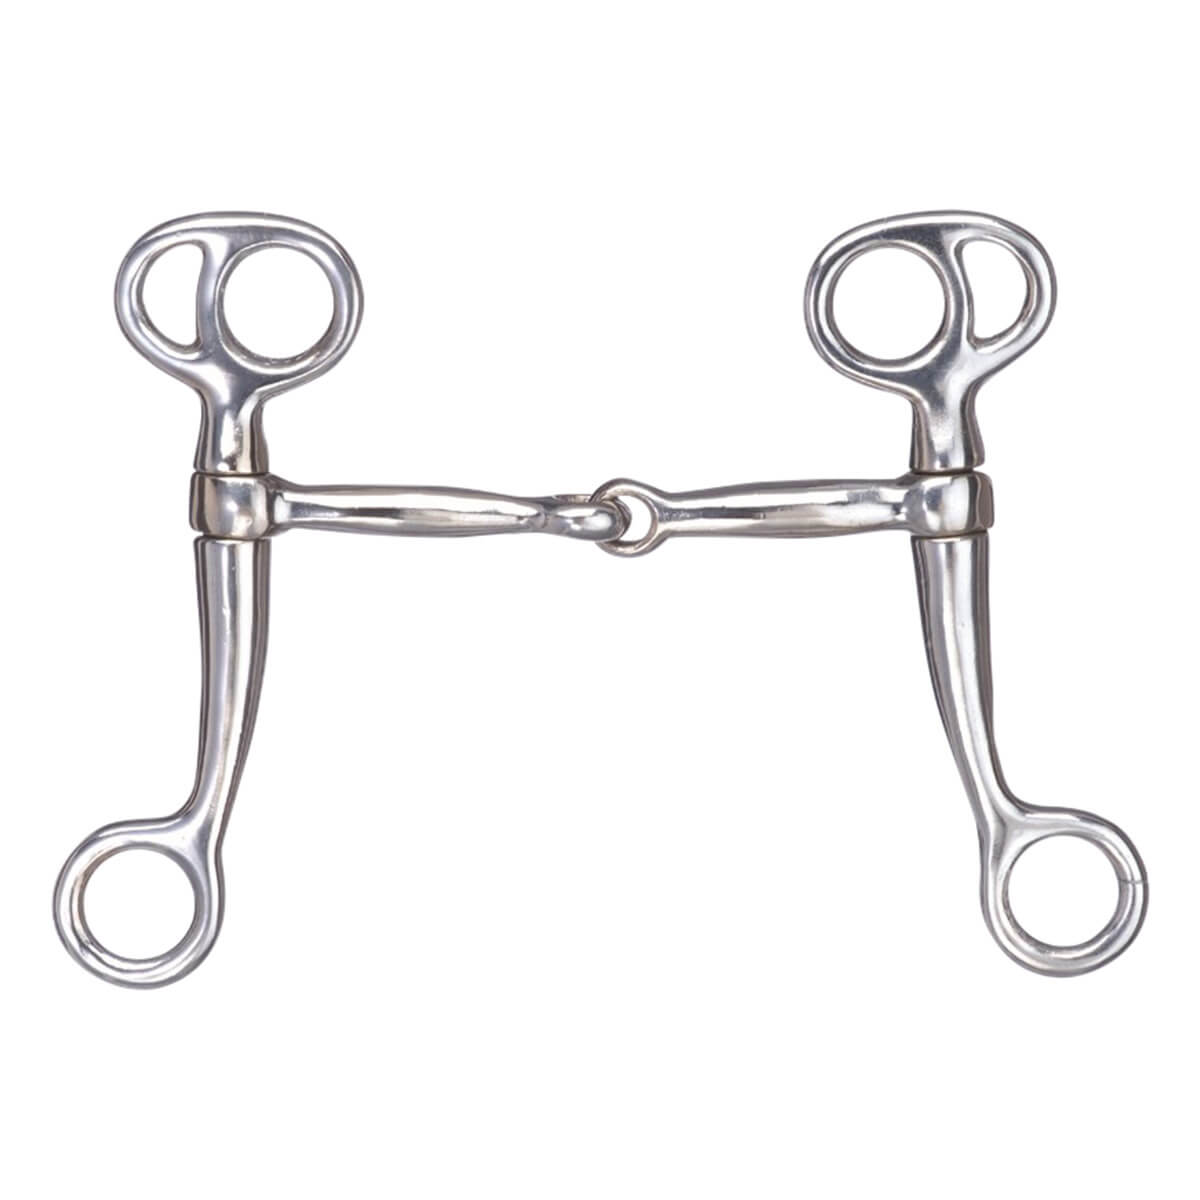 Metalab Tom Thumb Snaffle Bit with Chrome Mouth